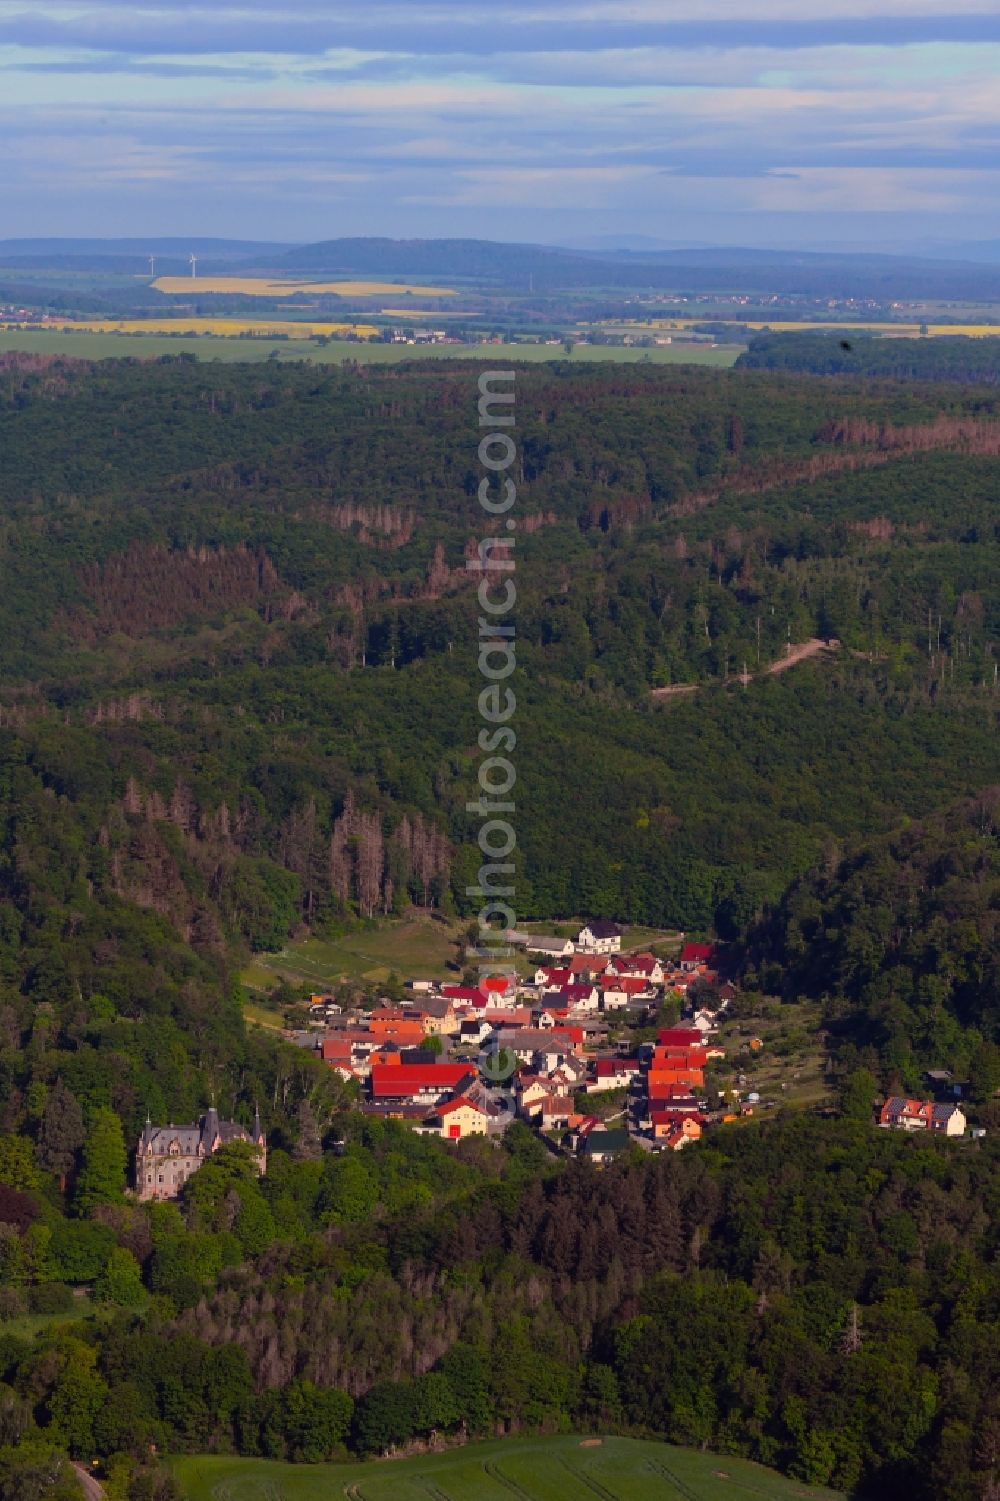 Aerial photograph Morungen - Village - view on the edge of forested areas in Morungen in the state Saxony-Anhalt, Germany